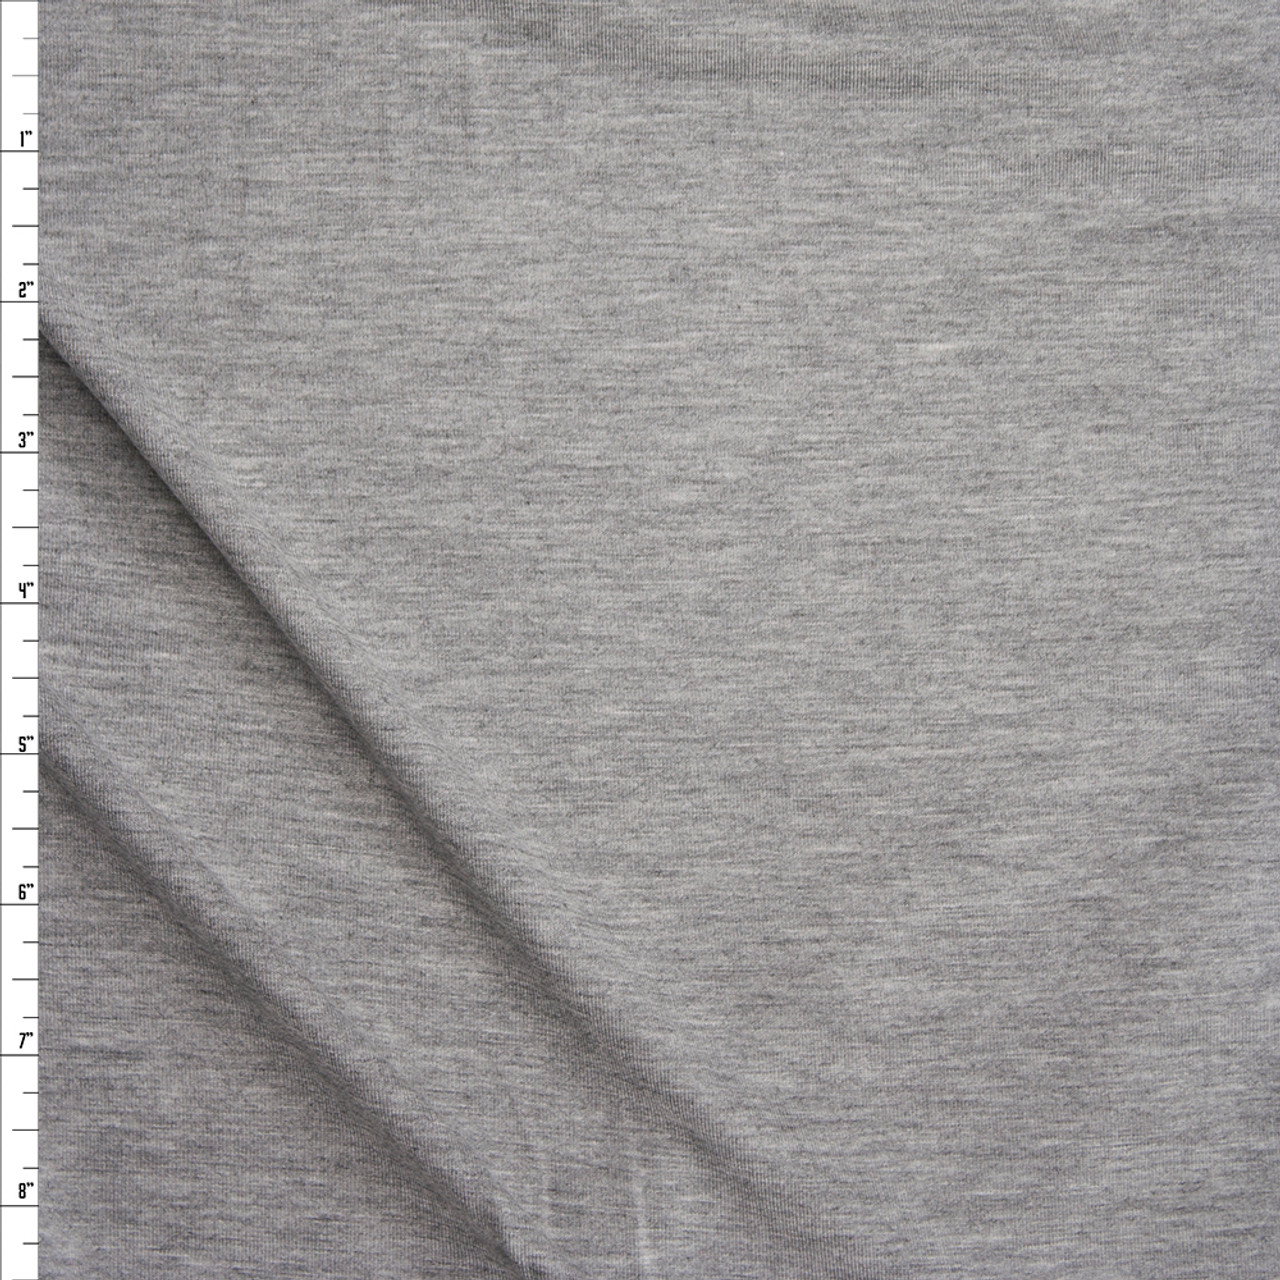 Four-Way Stretch Yoga knit fabric with Wicking Materials